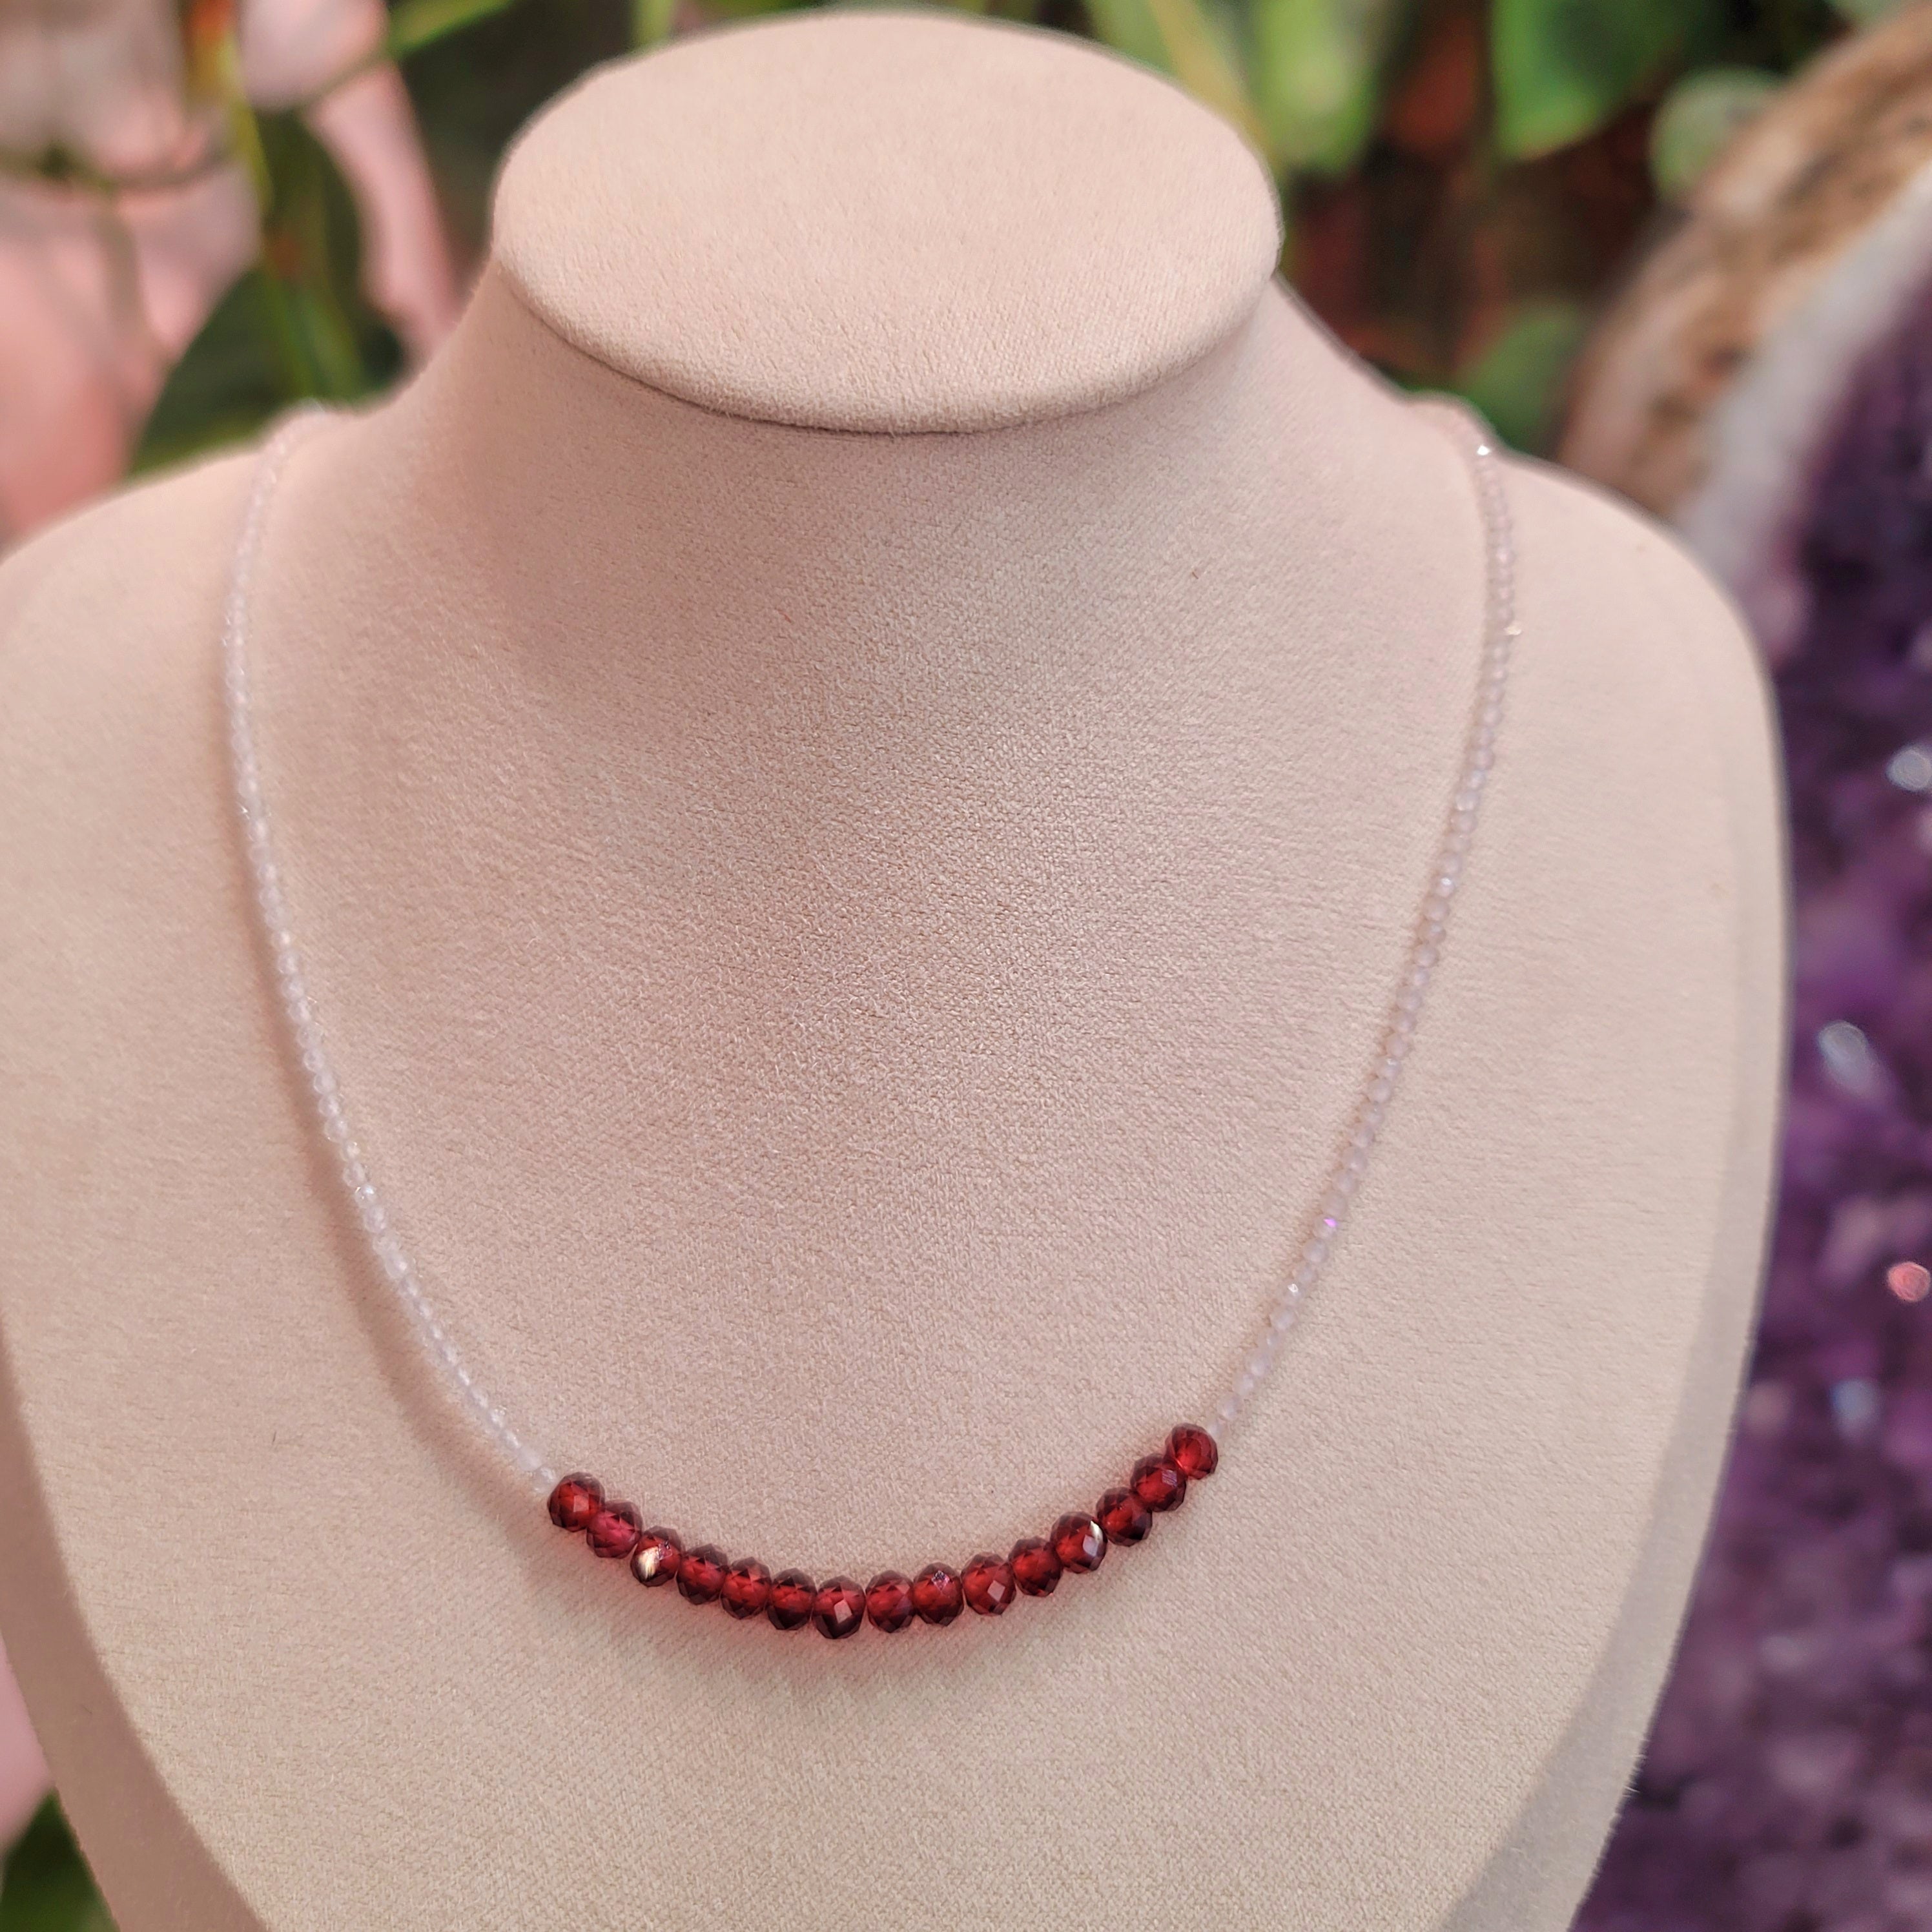 Red Garnet & White Topaz Micro Faceted Necklace for Health and Strength